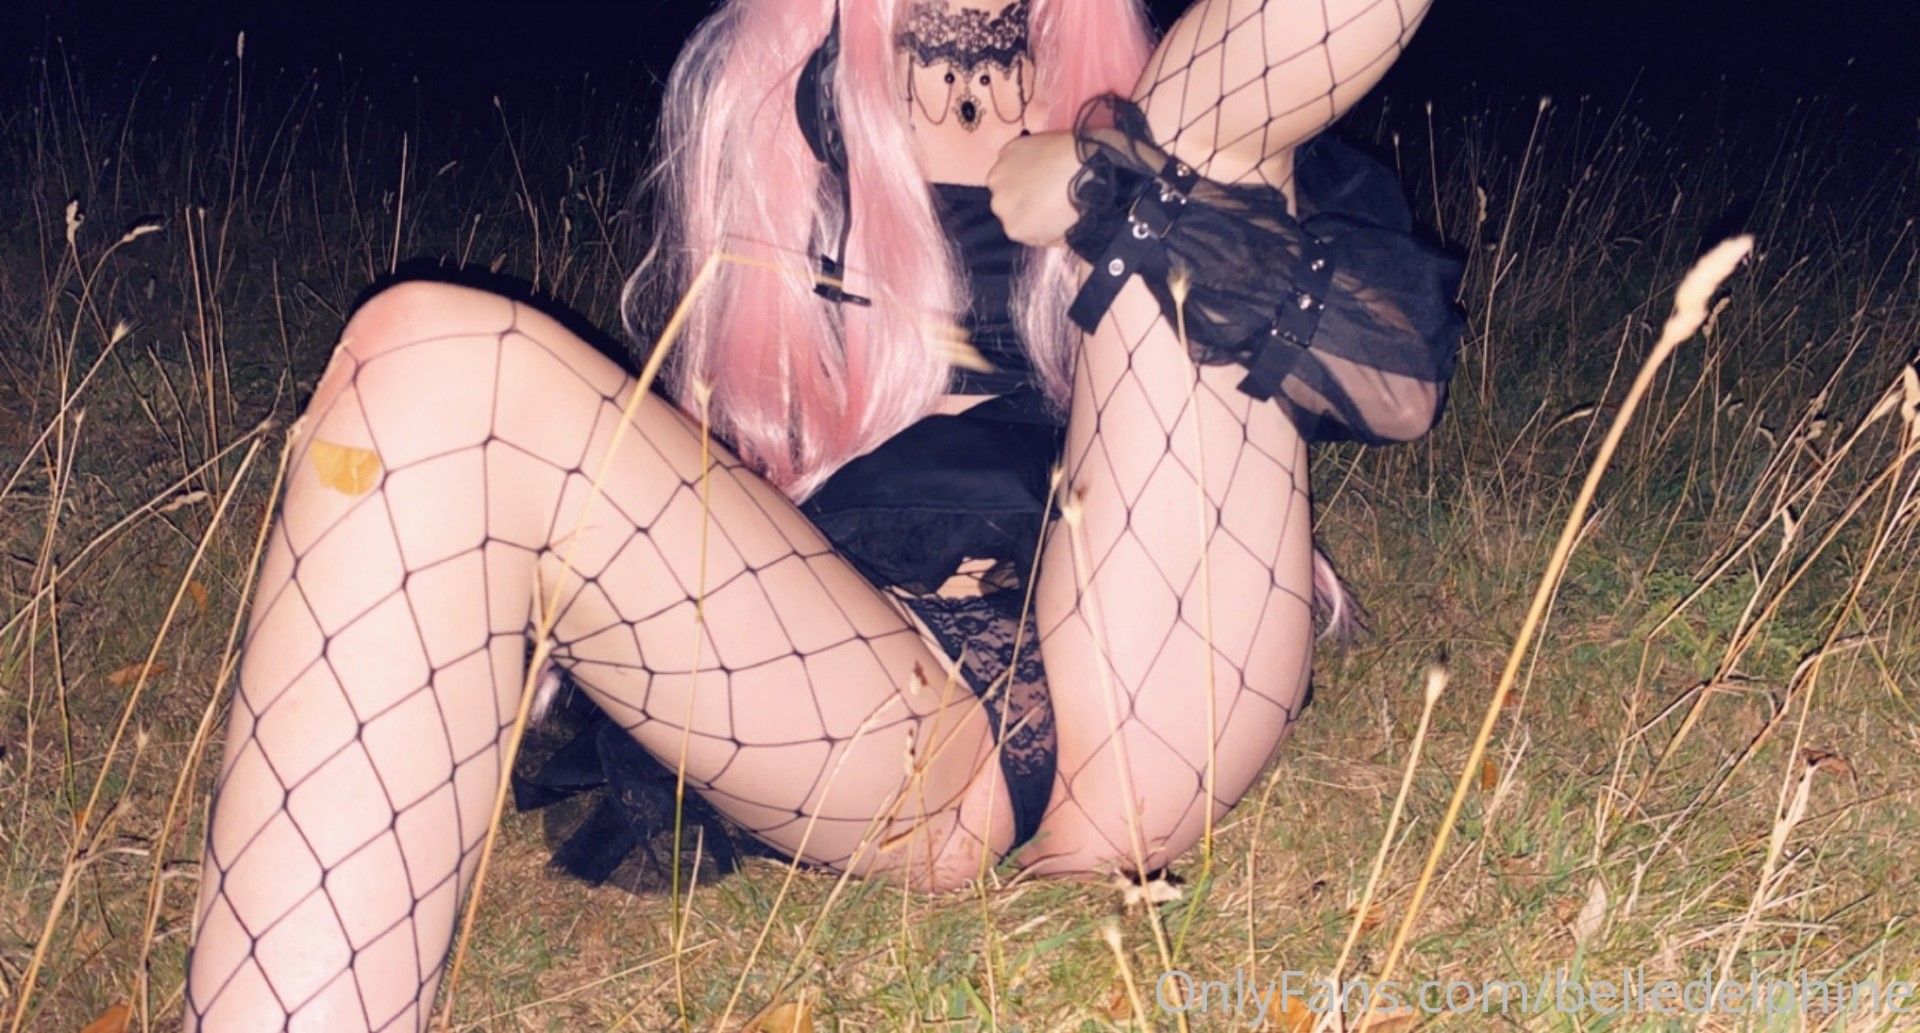 Belle Delphine Night Time Outdoors Onlyfans 0006